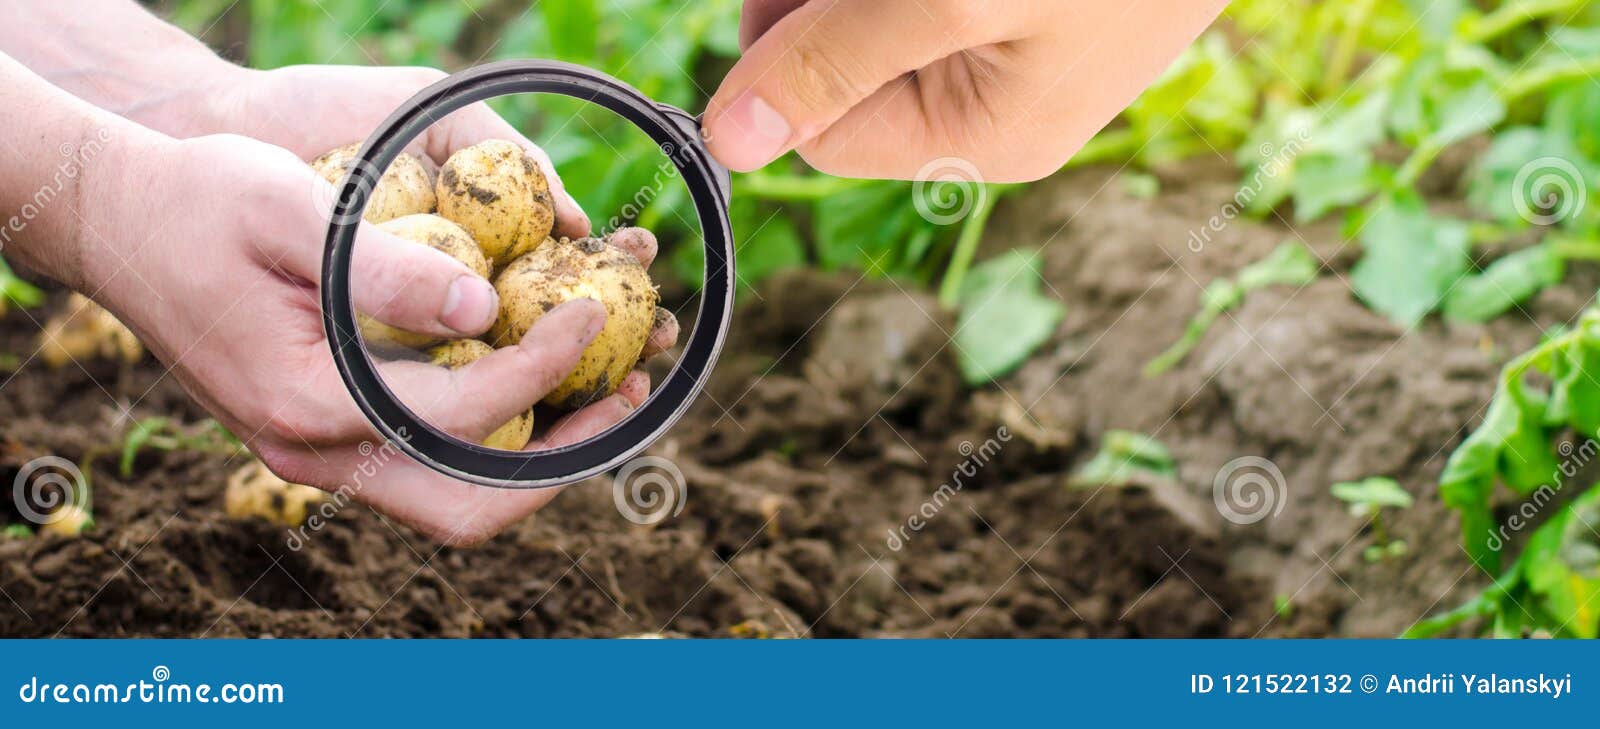 the food scientist checks potatoes for chemicals and pesticides. useful vegetables. pomology. a bush of young yellow potatoes, har